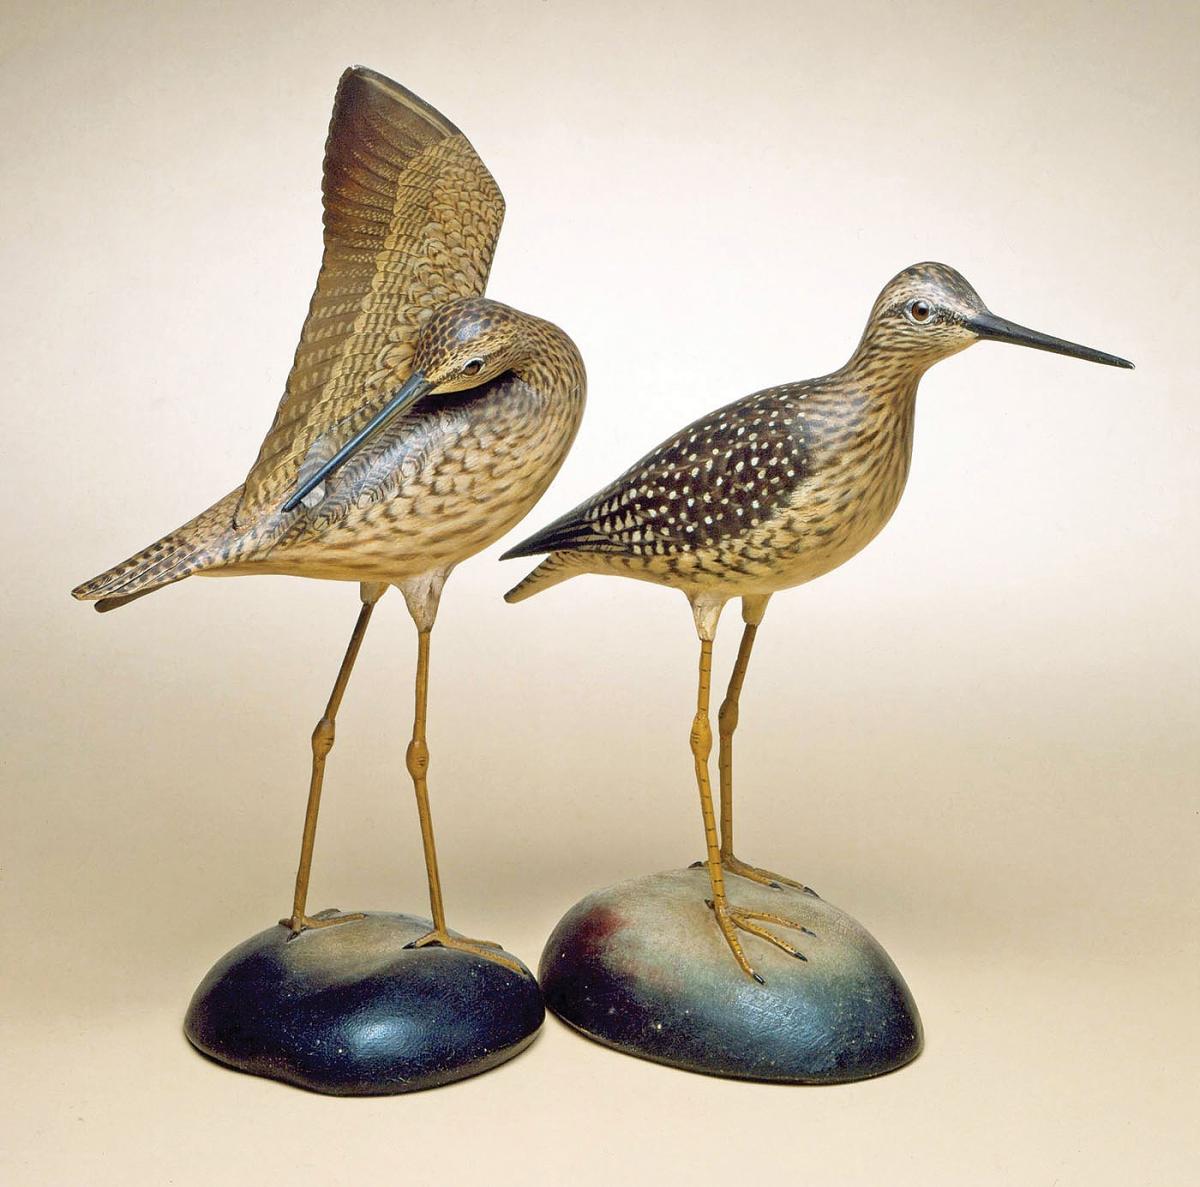 A pair of yellowlegs birds, carved in wood, one standing and the other reaching its beak under its wing